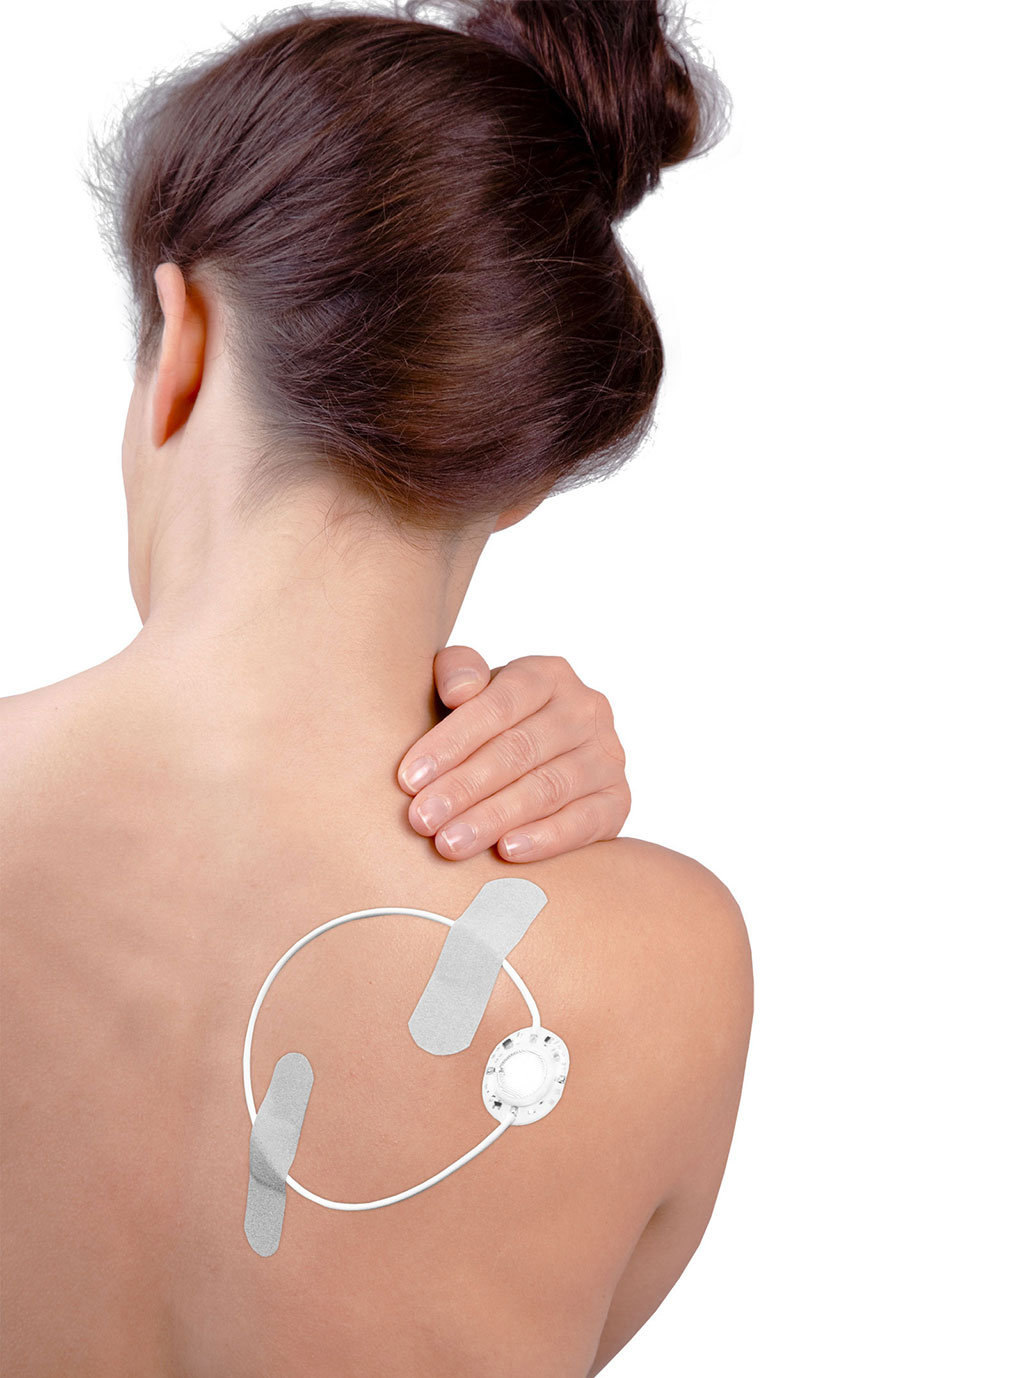 Image: Various types of pain can be treated using the ActiPatch device (Photo courtesy of BioElectronics)